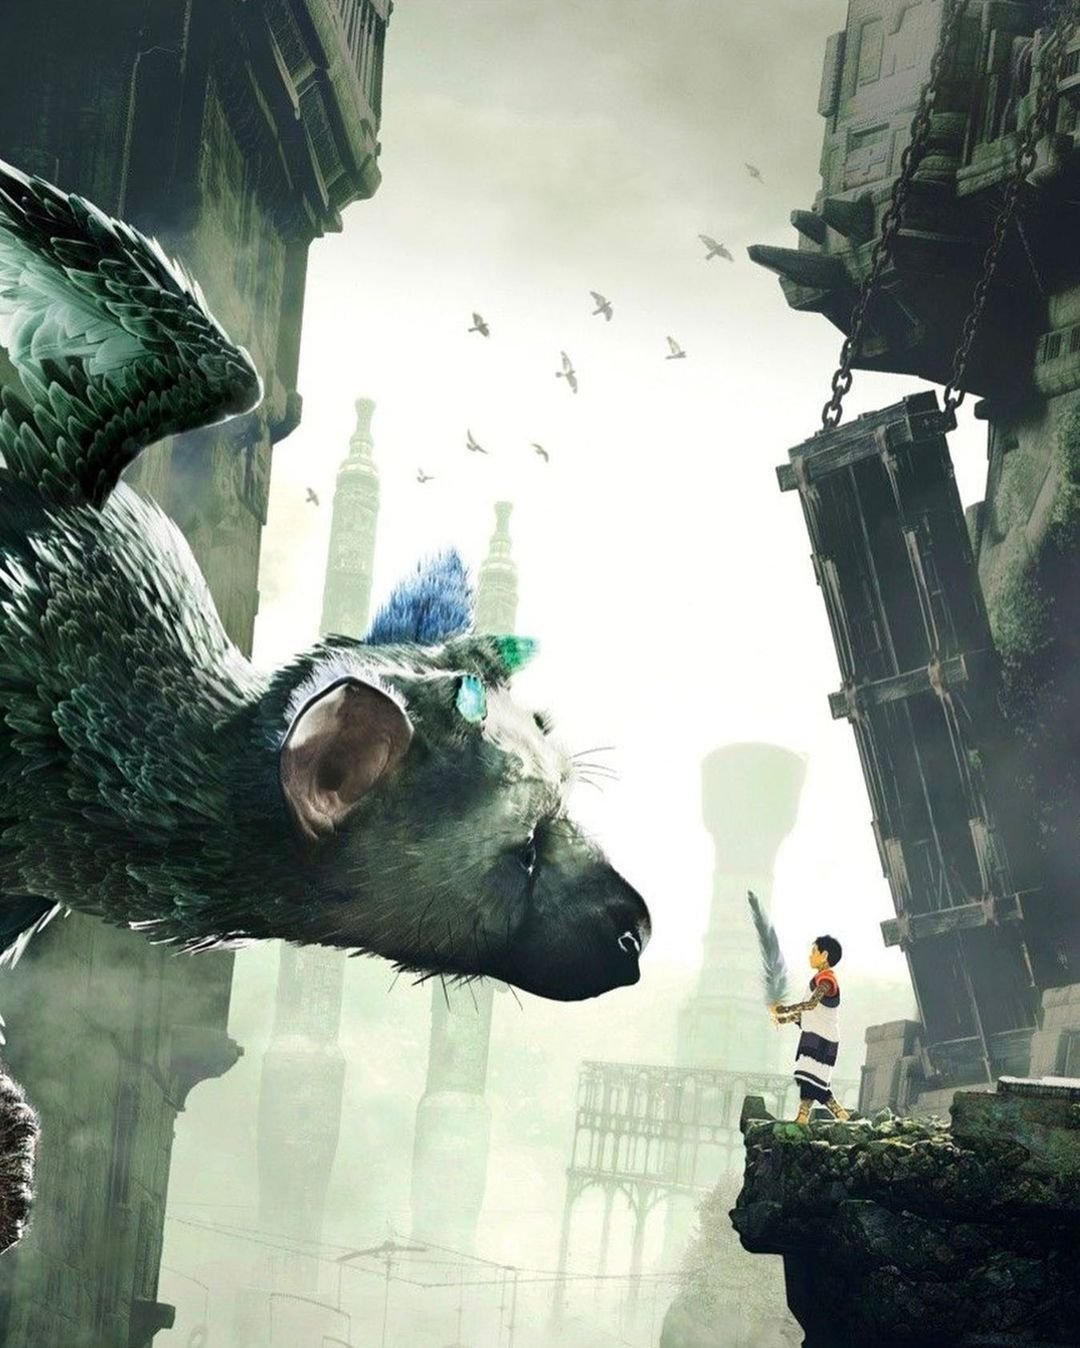 Perspective of a Retro Gamer: The Last Guardian